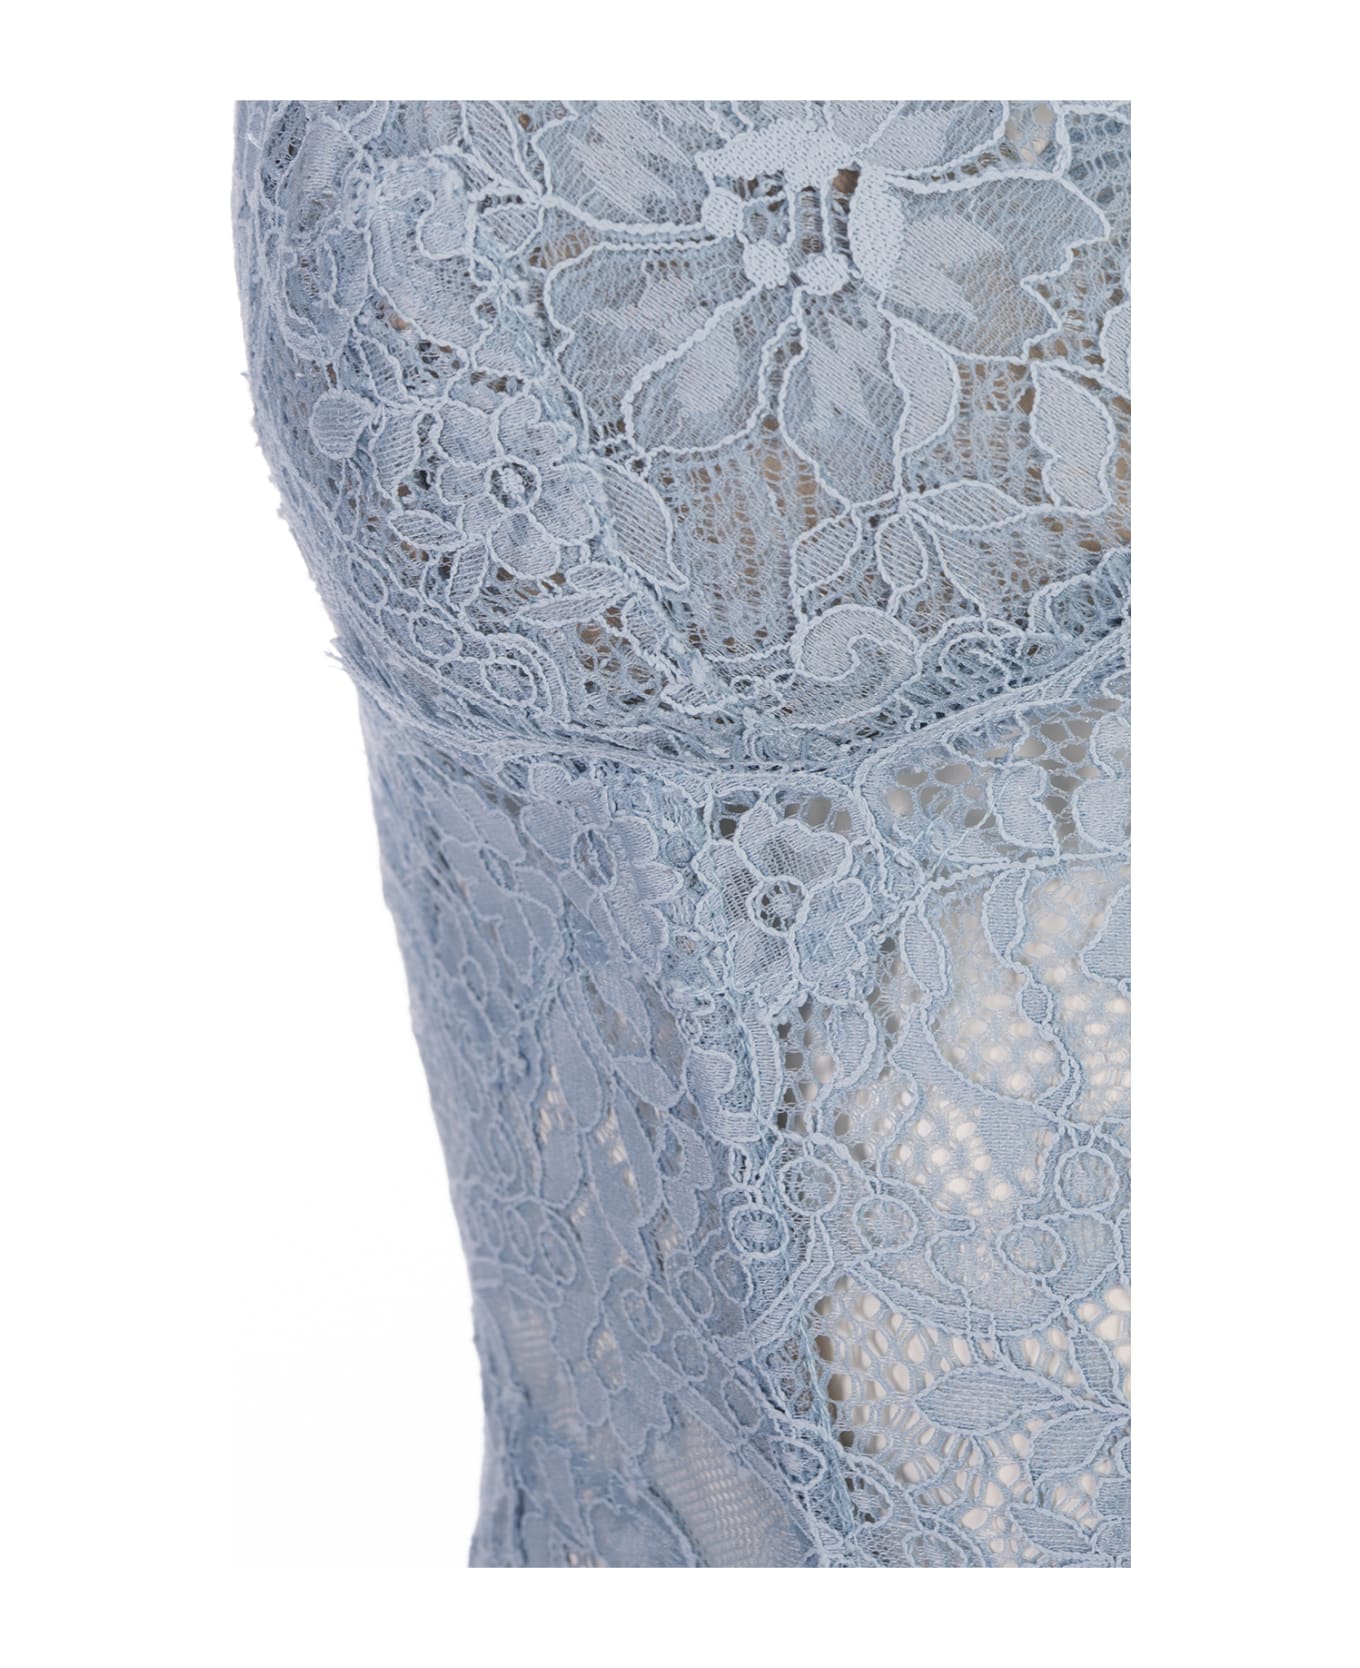 Ermanno Scervino All-over Light Blue Lace Top - Blue ランジェリー＆パジャマ